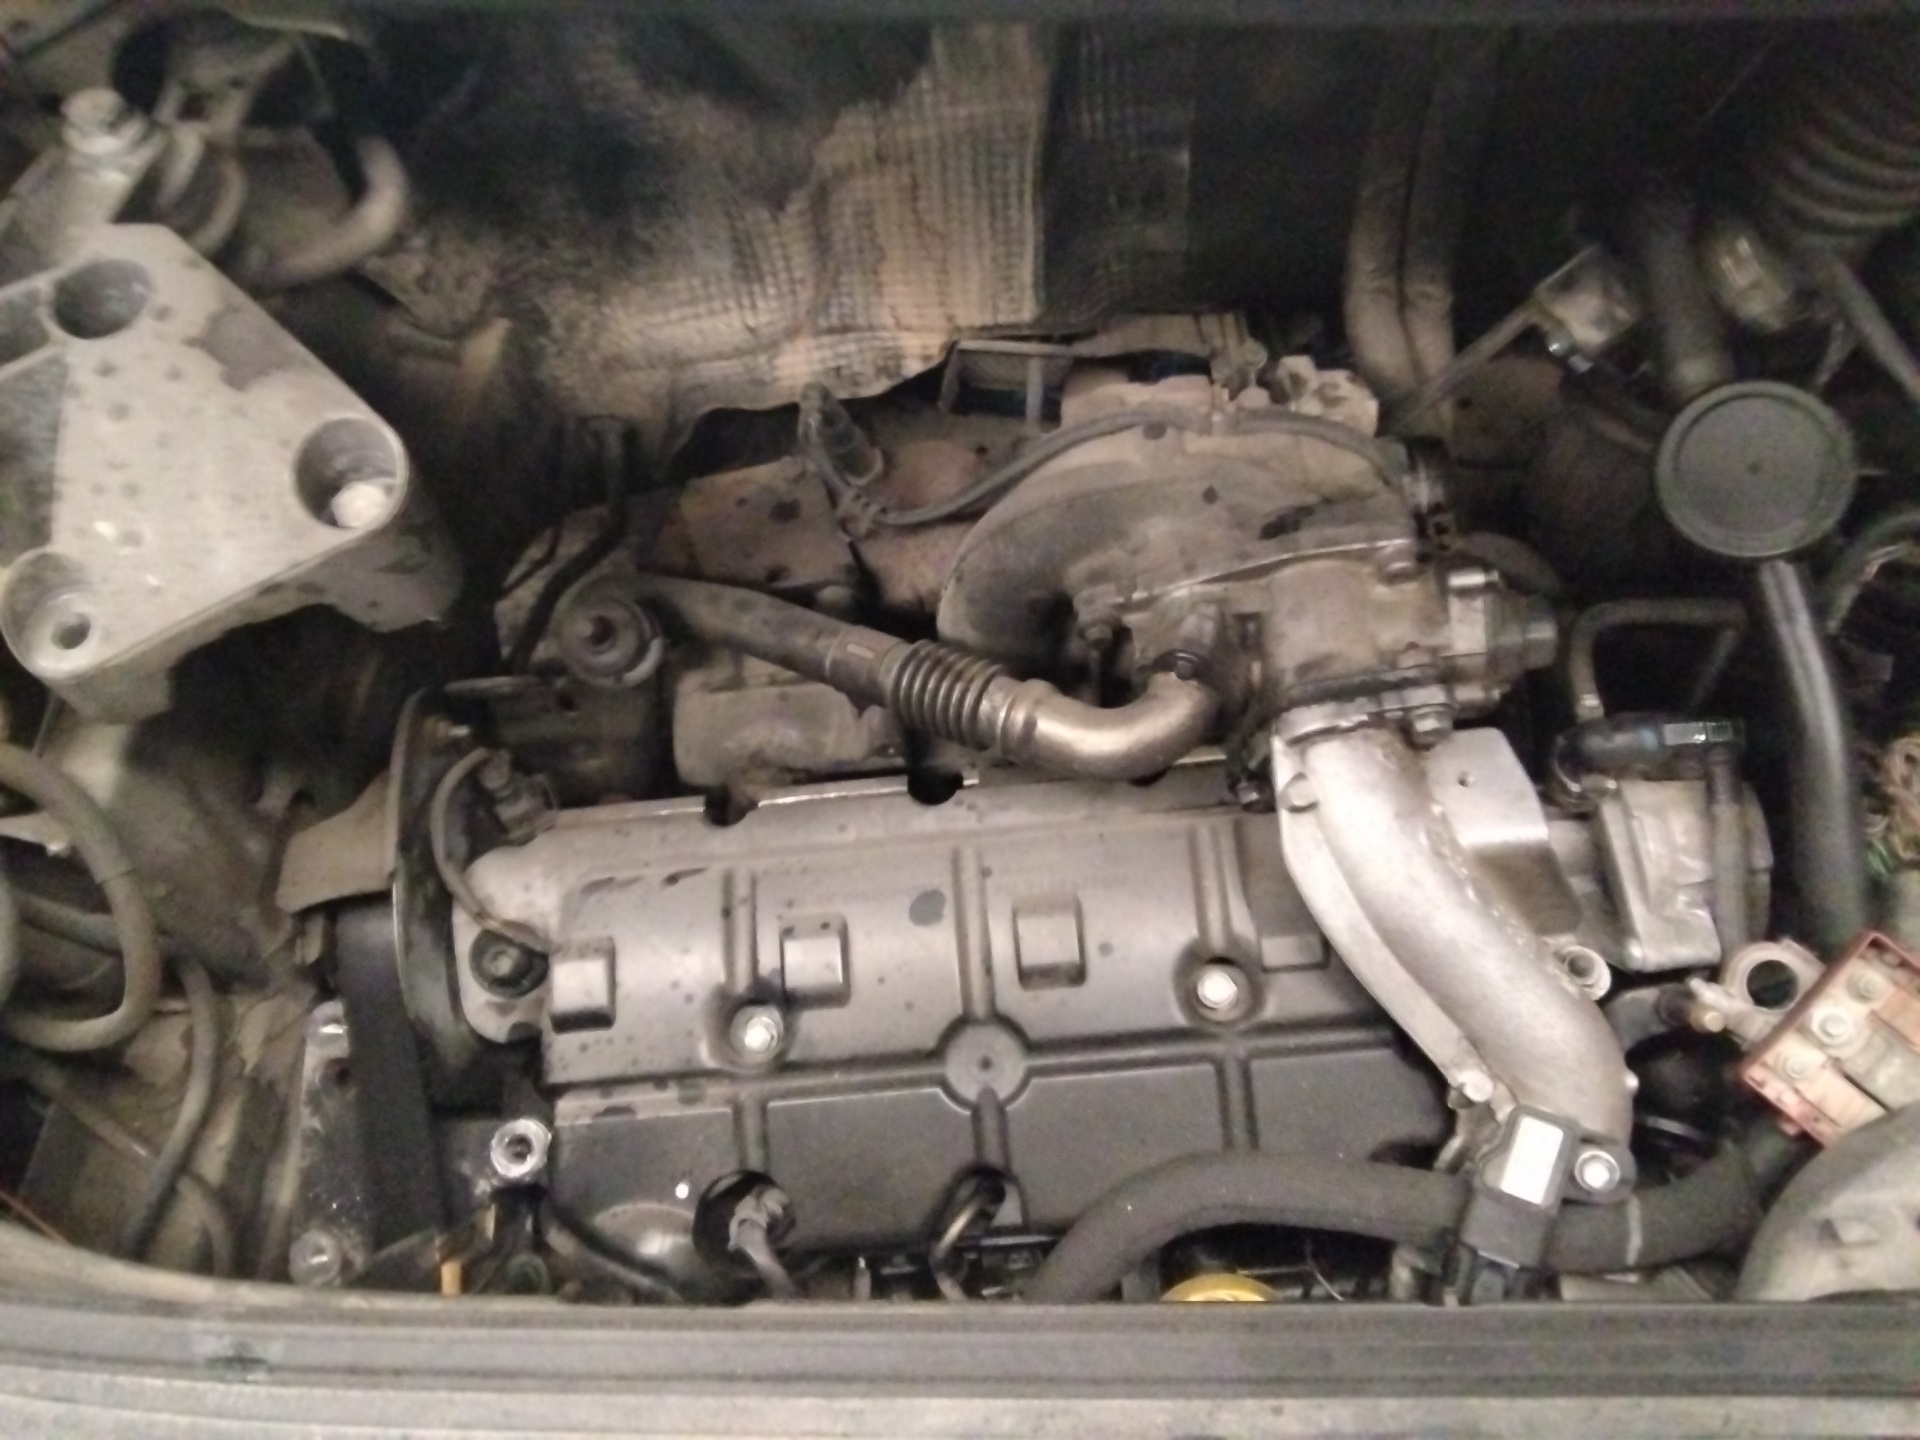 RENAULT Scenic 2 generation (2003-2010) Other Engine Compartment Parts NOTIENEREFERENCIA 25189185